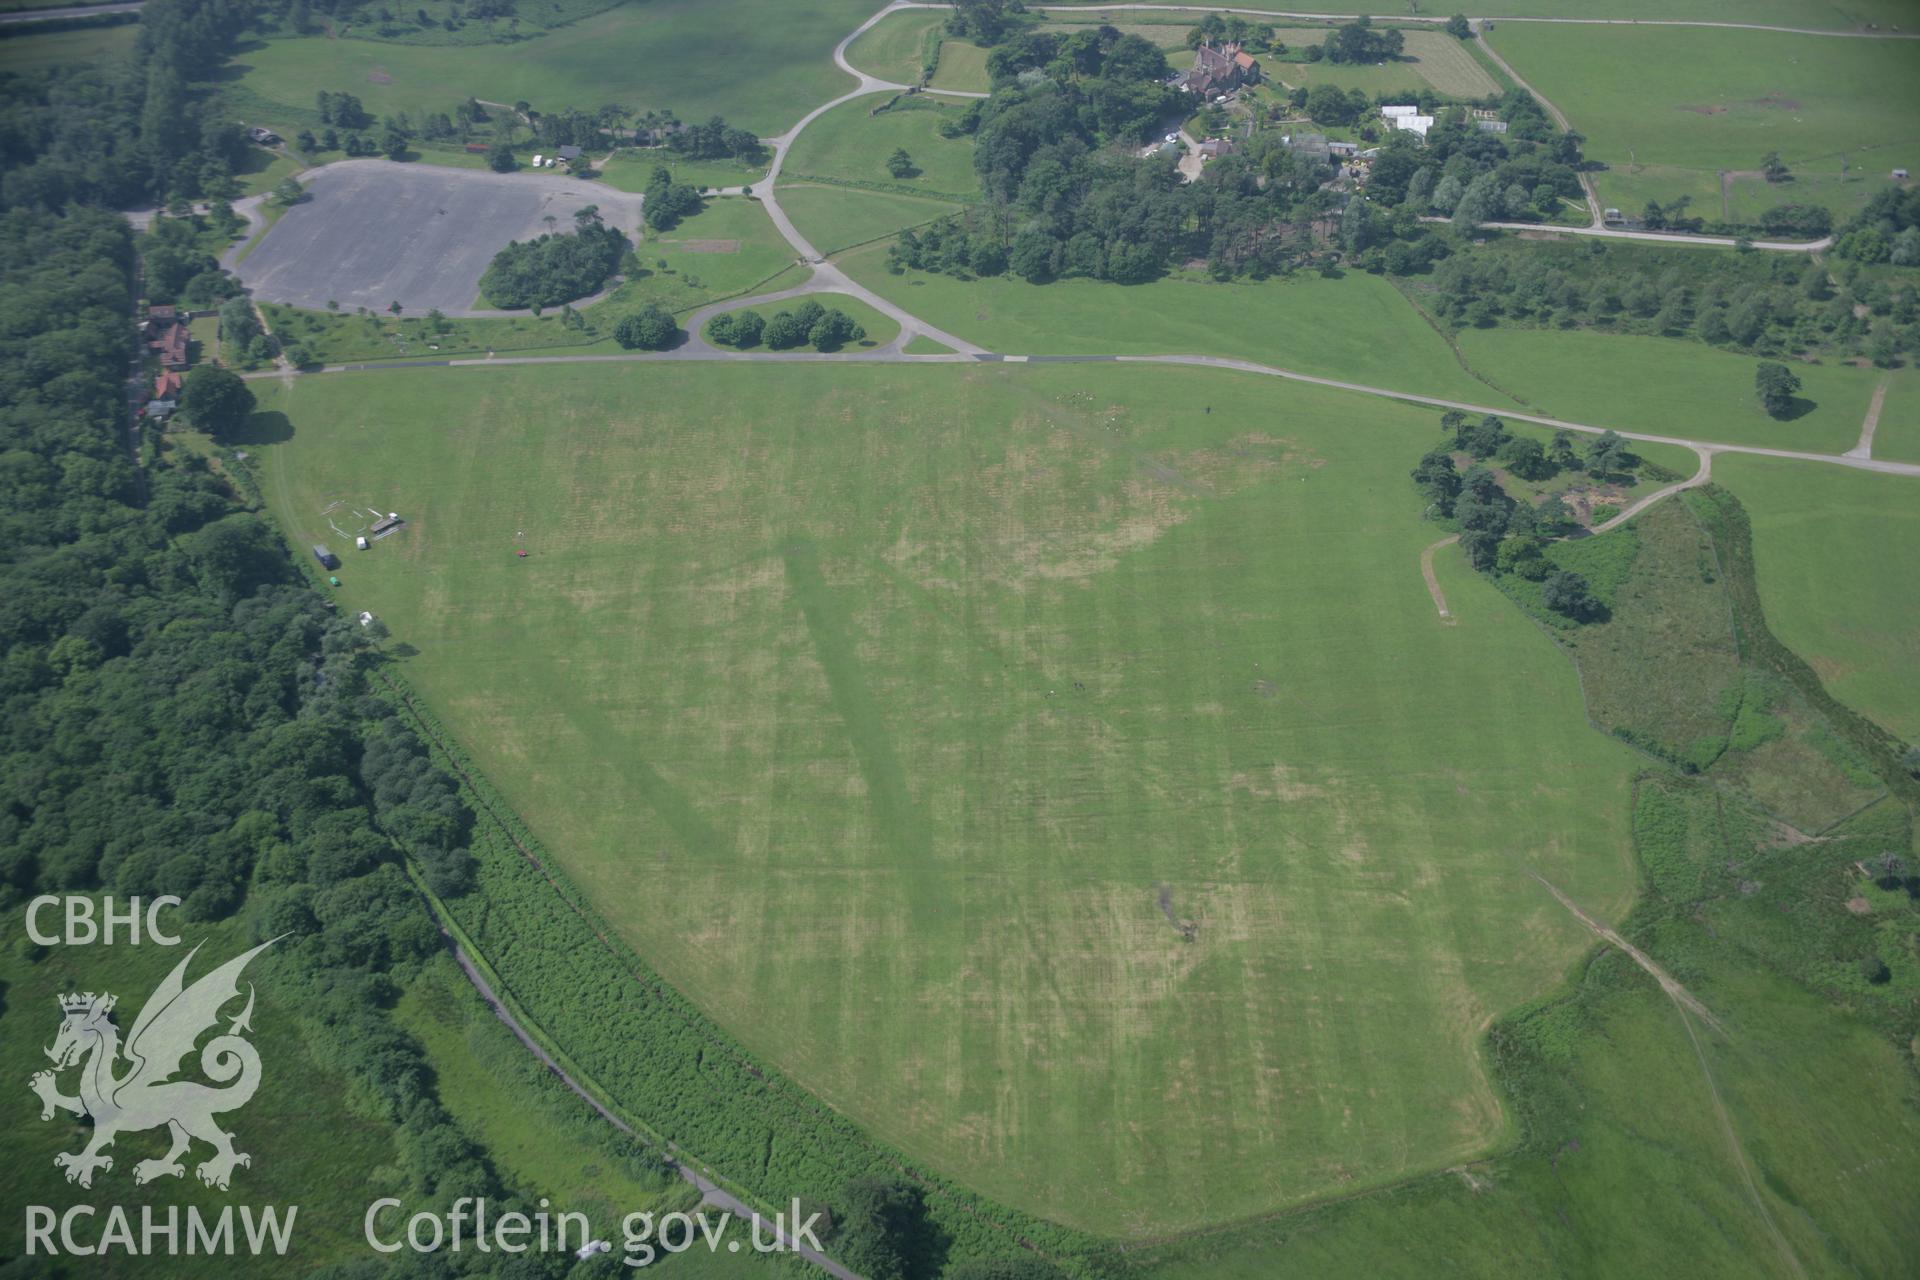 RCAHMW colour oblique photograph of Margam park, cropmarks. Taken by Toby Driver on 29/06/2006.